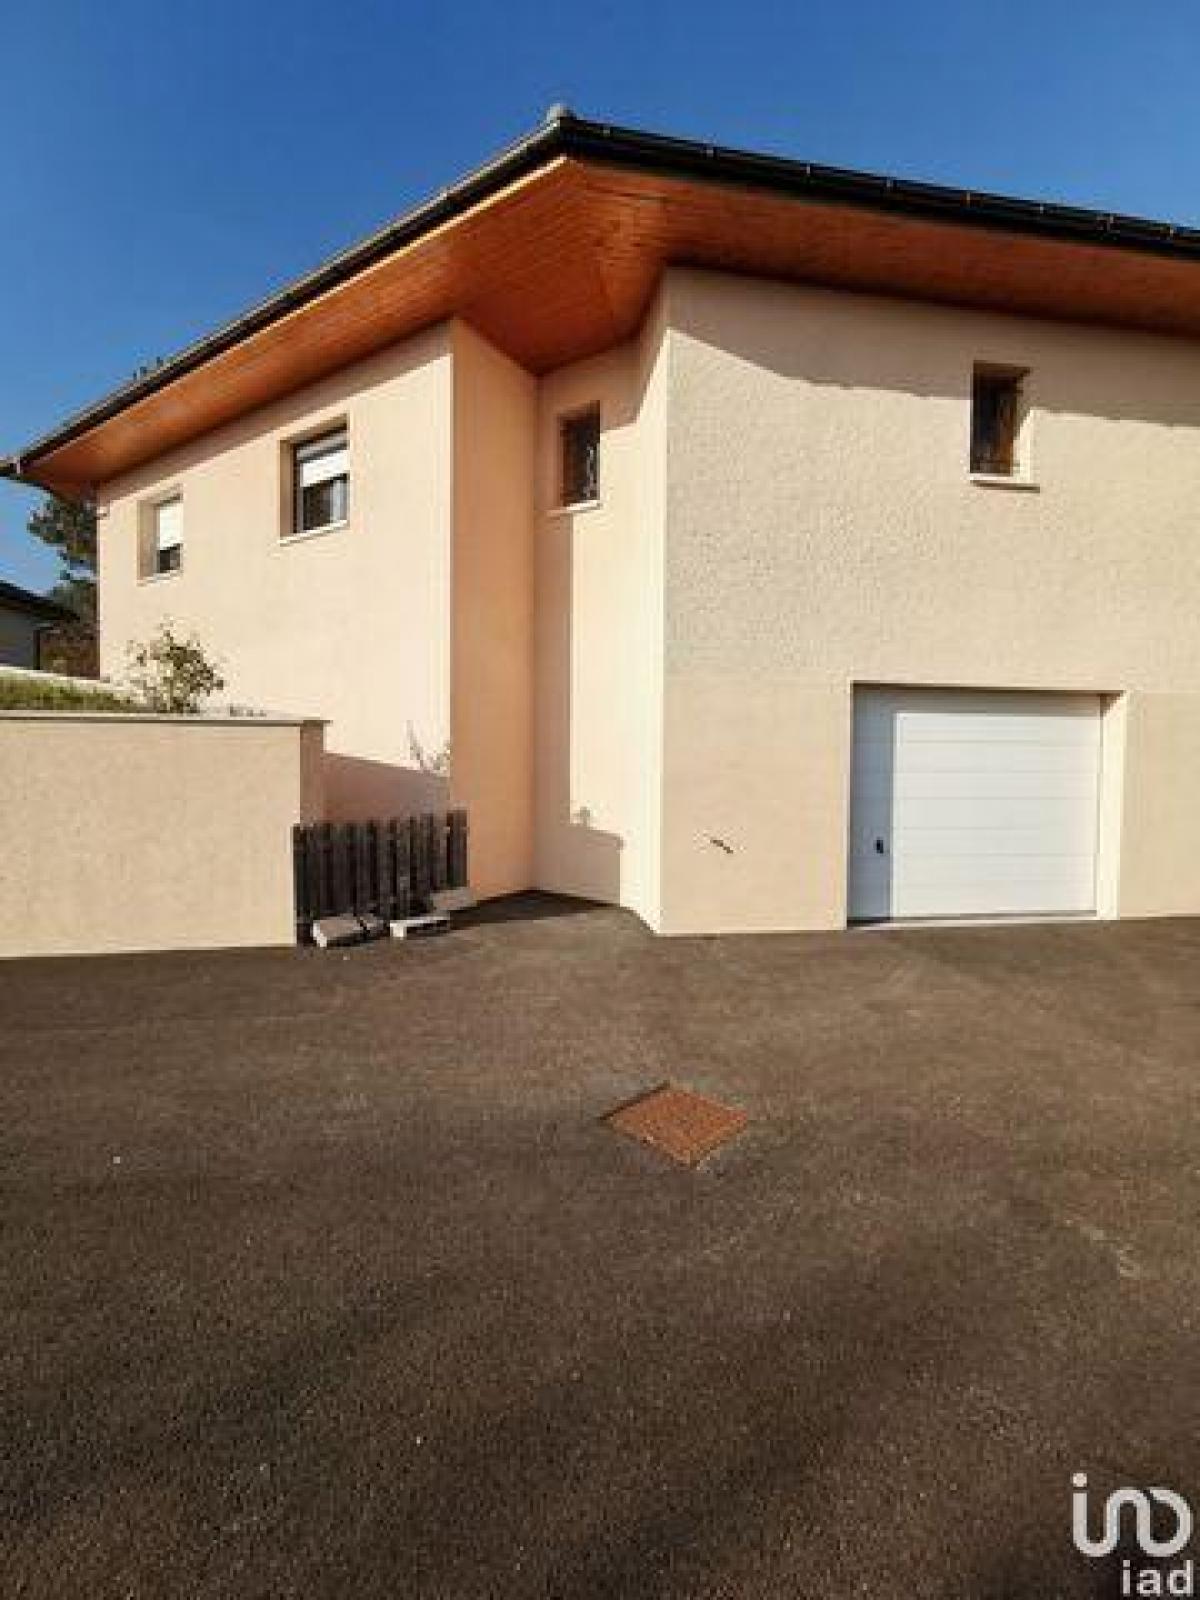 Picture of Home For Sale in Savigny, Bourgogne, France